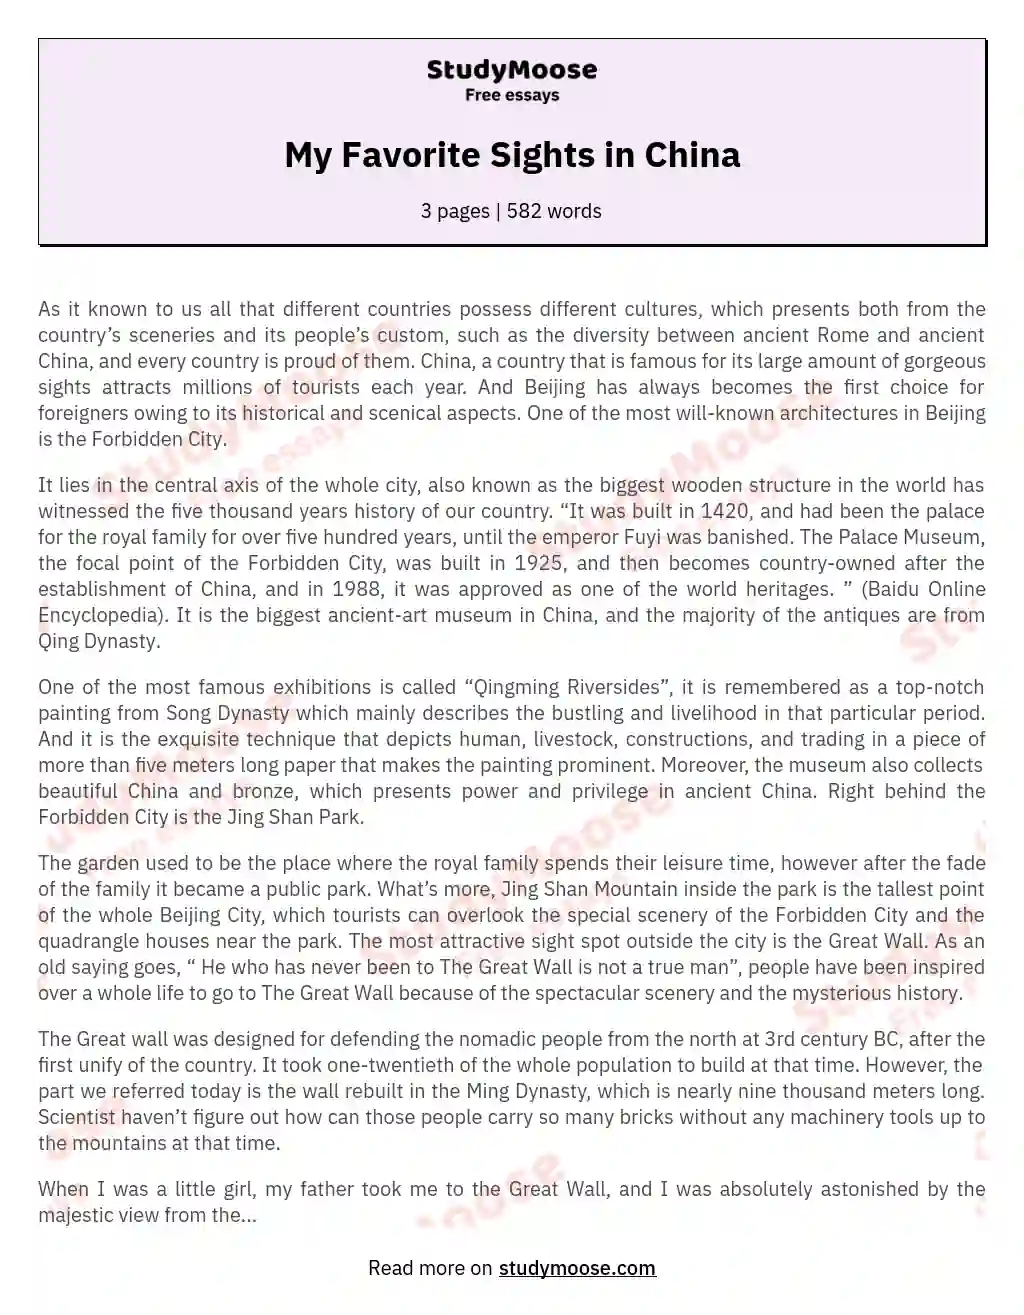 My Favorite Sights in China essay